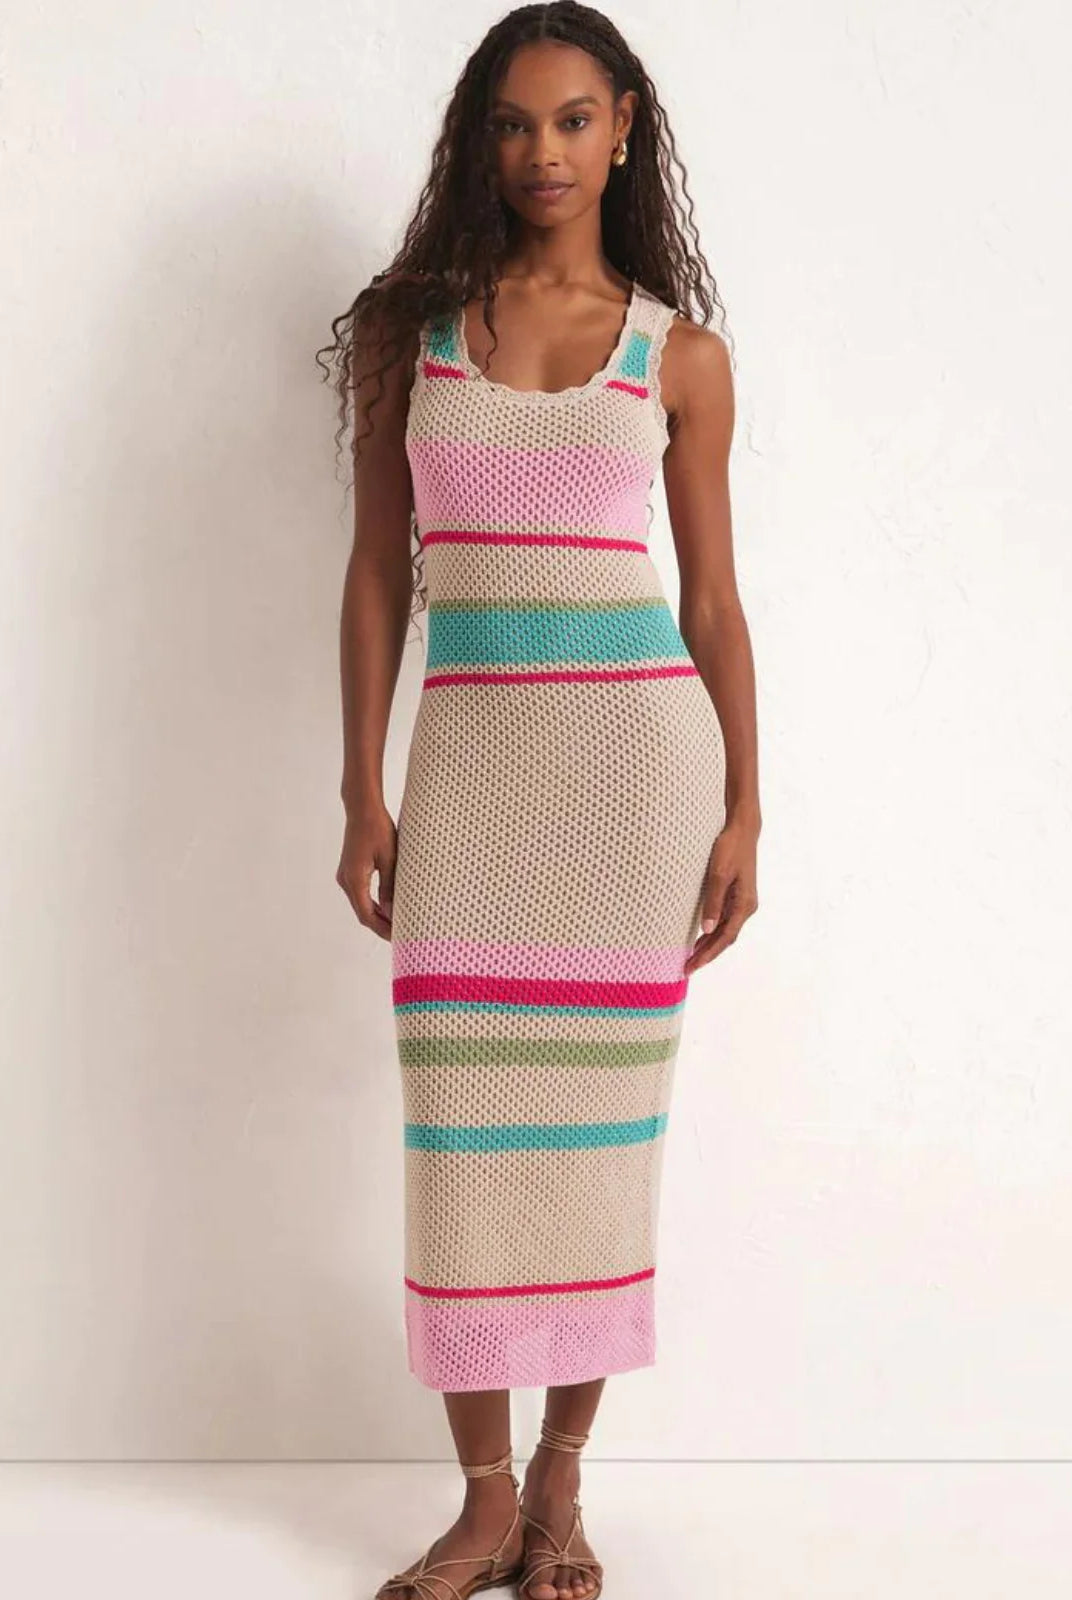 Z Supply Ibiza Striped Sweater Dress. You'll love the retro vibe of this sweater dress. Made to hug your curves in all the right ways, this lightweight crocheted midi features a flattering scoop neckline with a delicate lace trim.